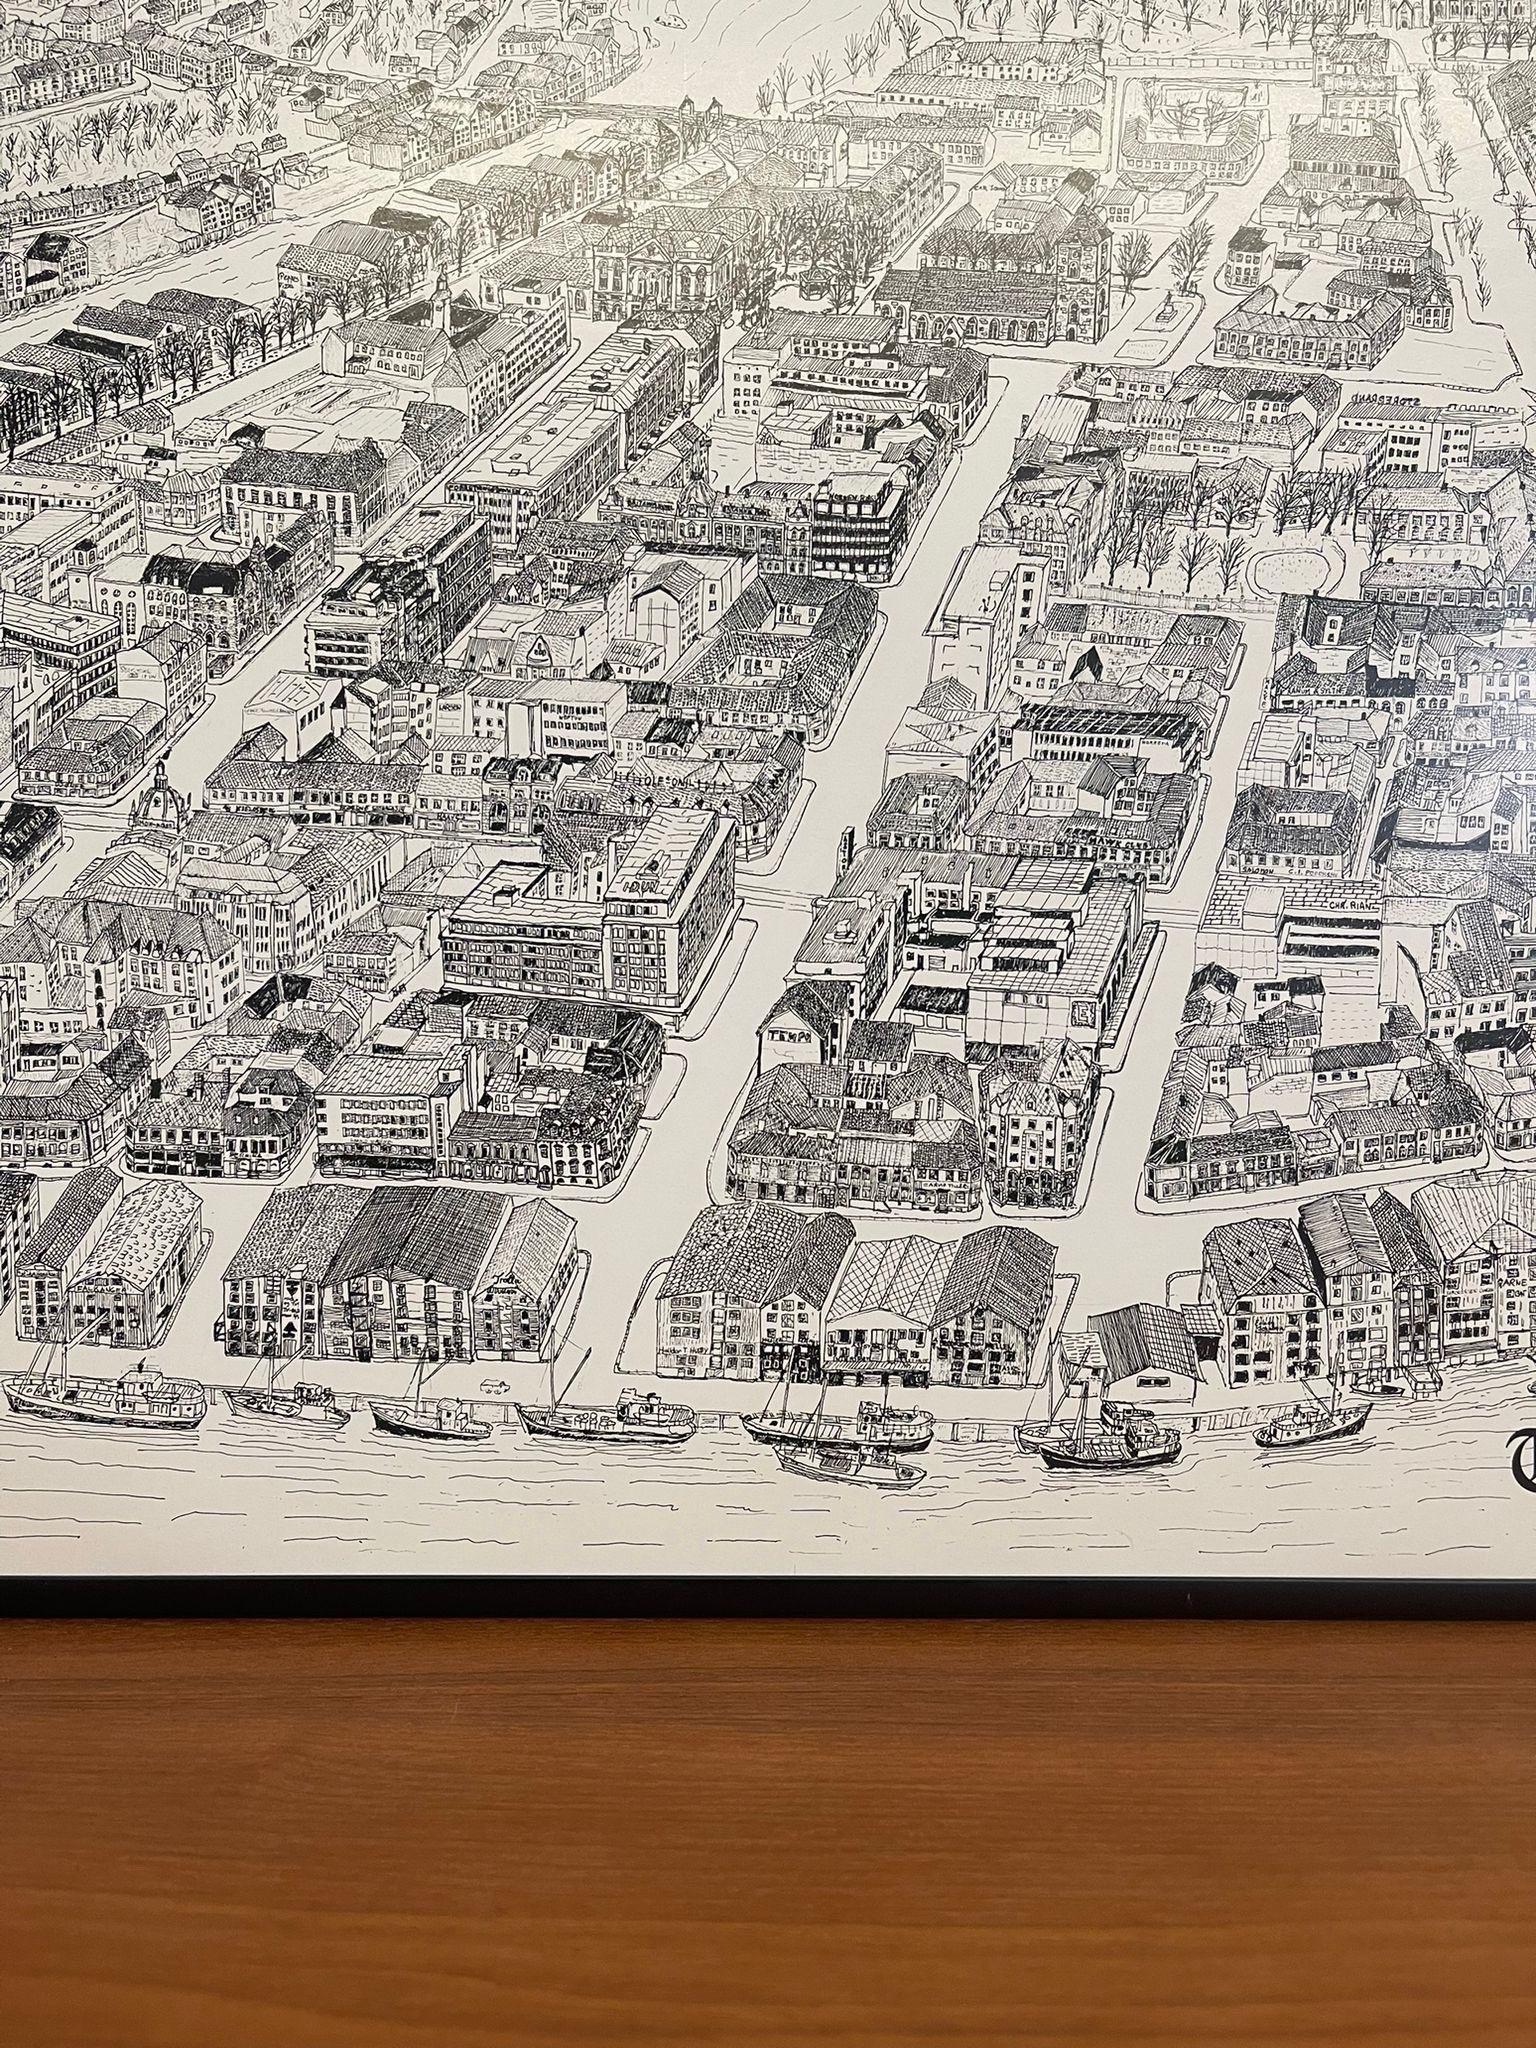 Wood Vintage Framed Print of Trondheim Cityscape Map.